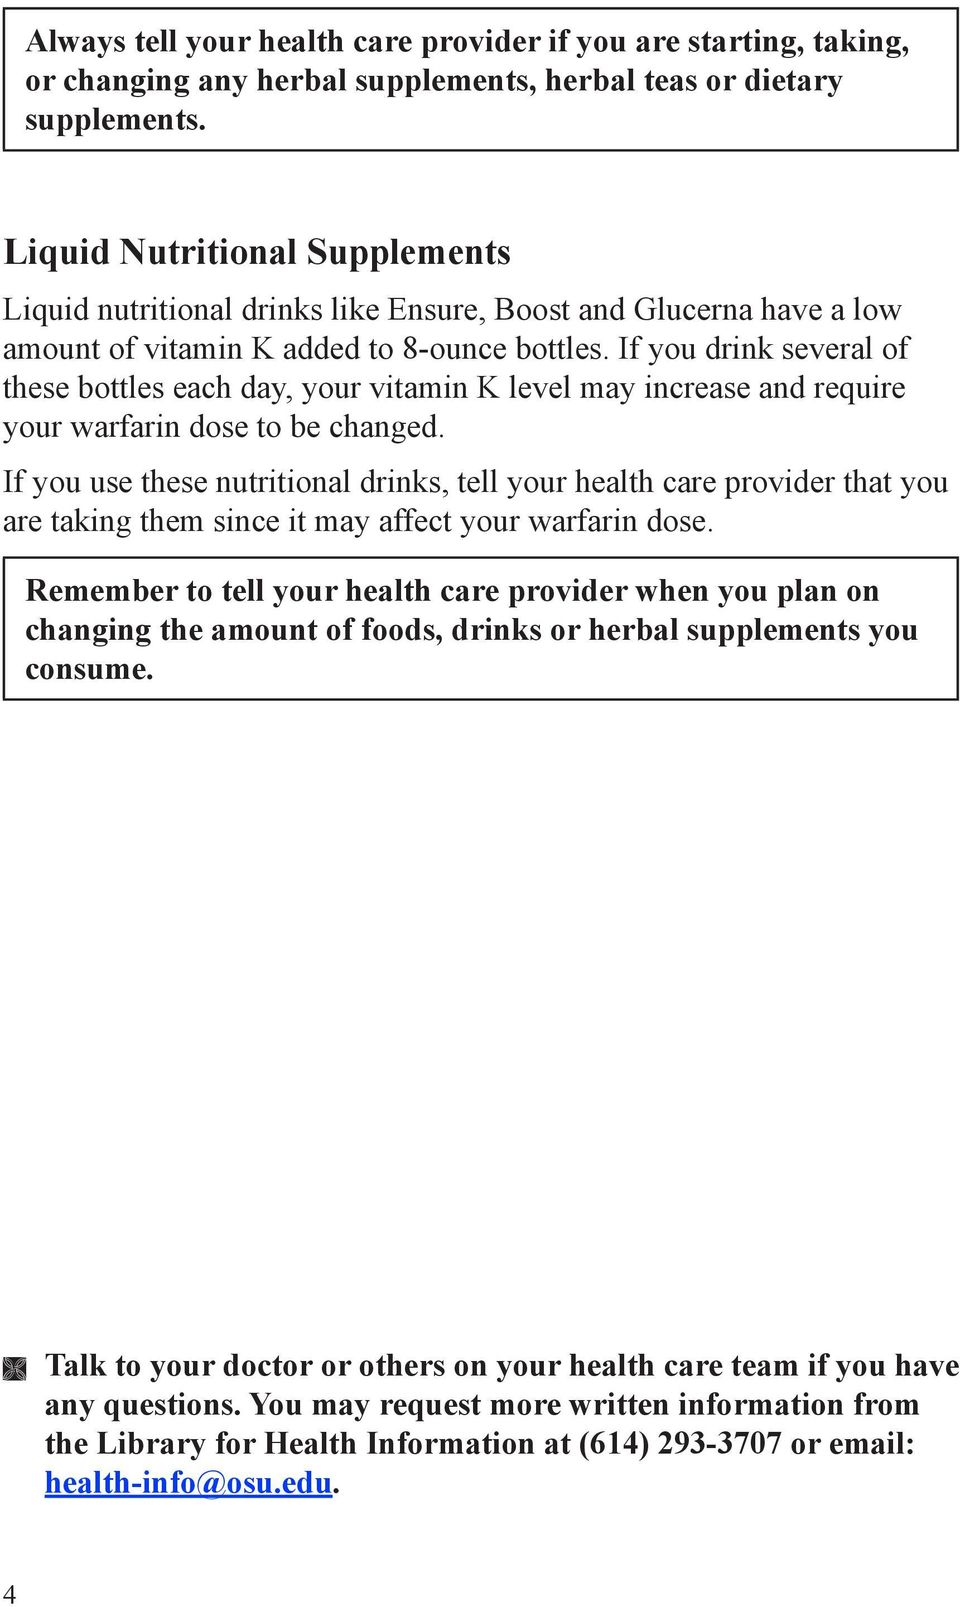 If you drink several of these bottles each day, your vitamin K level may increase and require your warfarin dose to be changed.